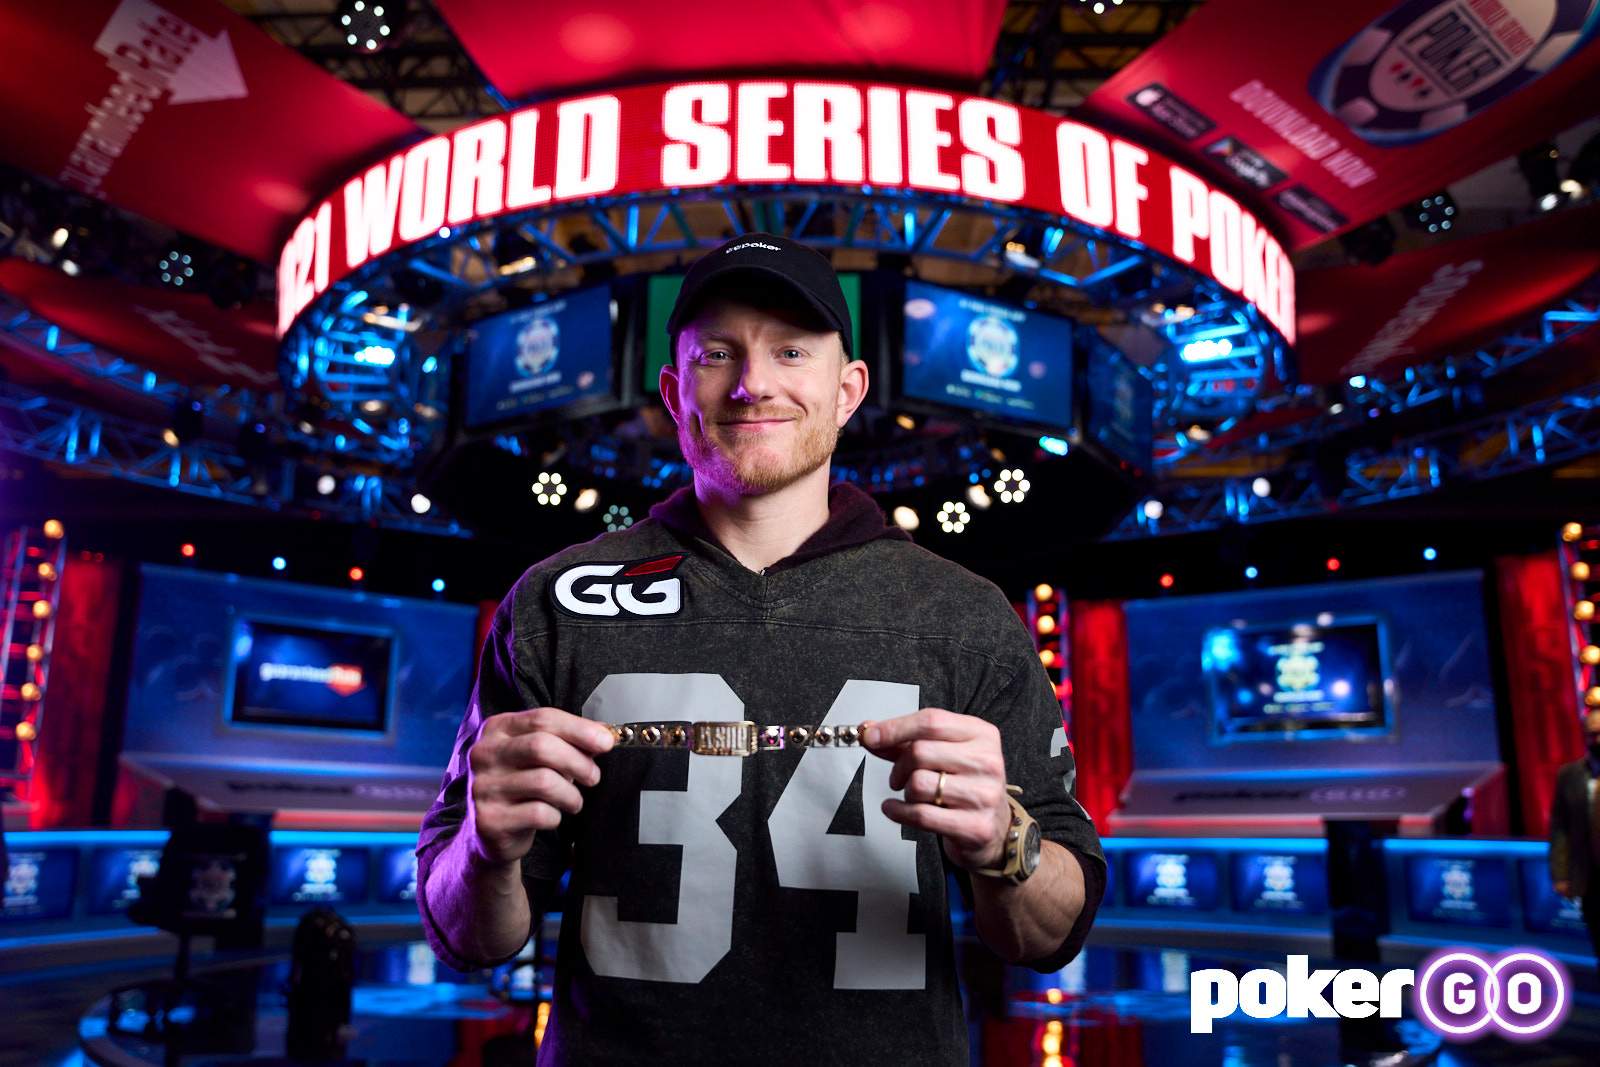 Jason Koon's First Gold Bracelet Comes in 2021 WSOP $25,000 Heads-Up Championship